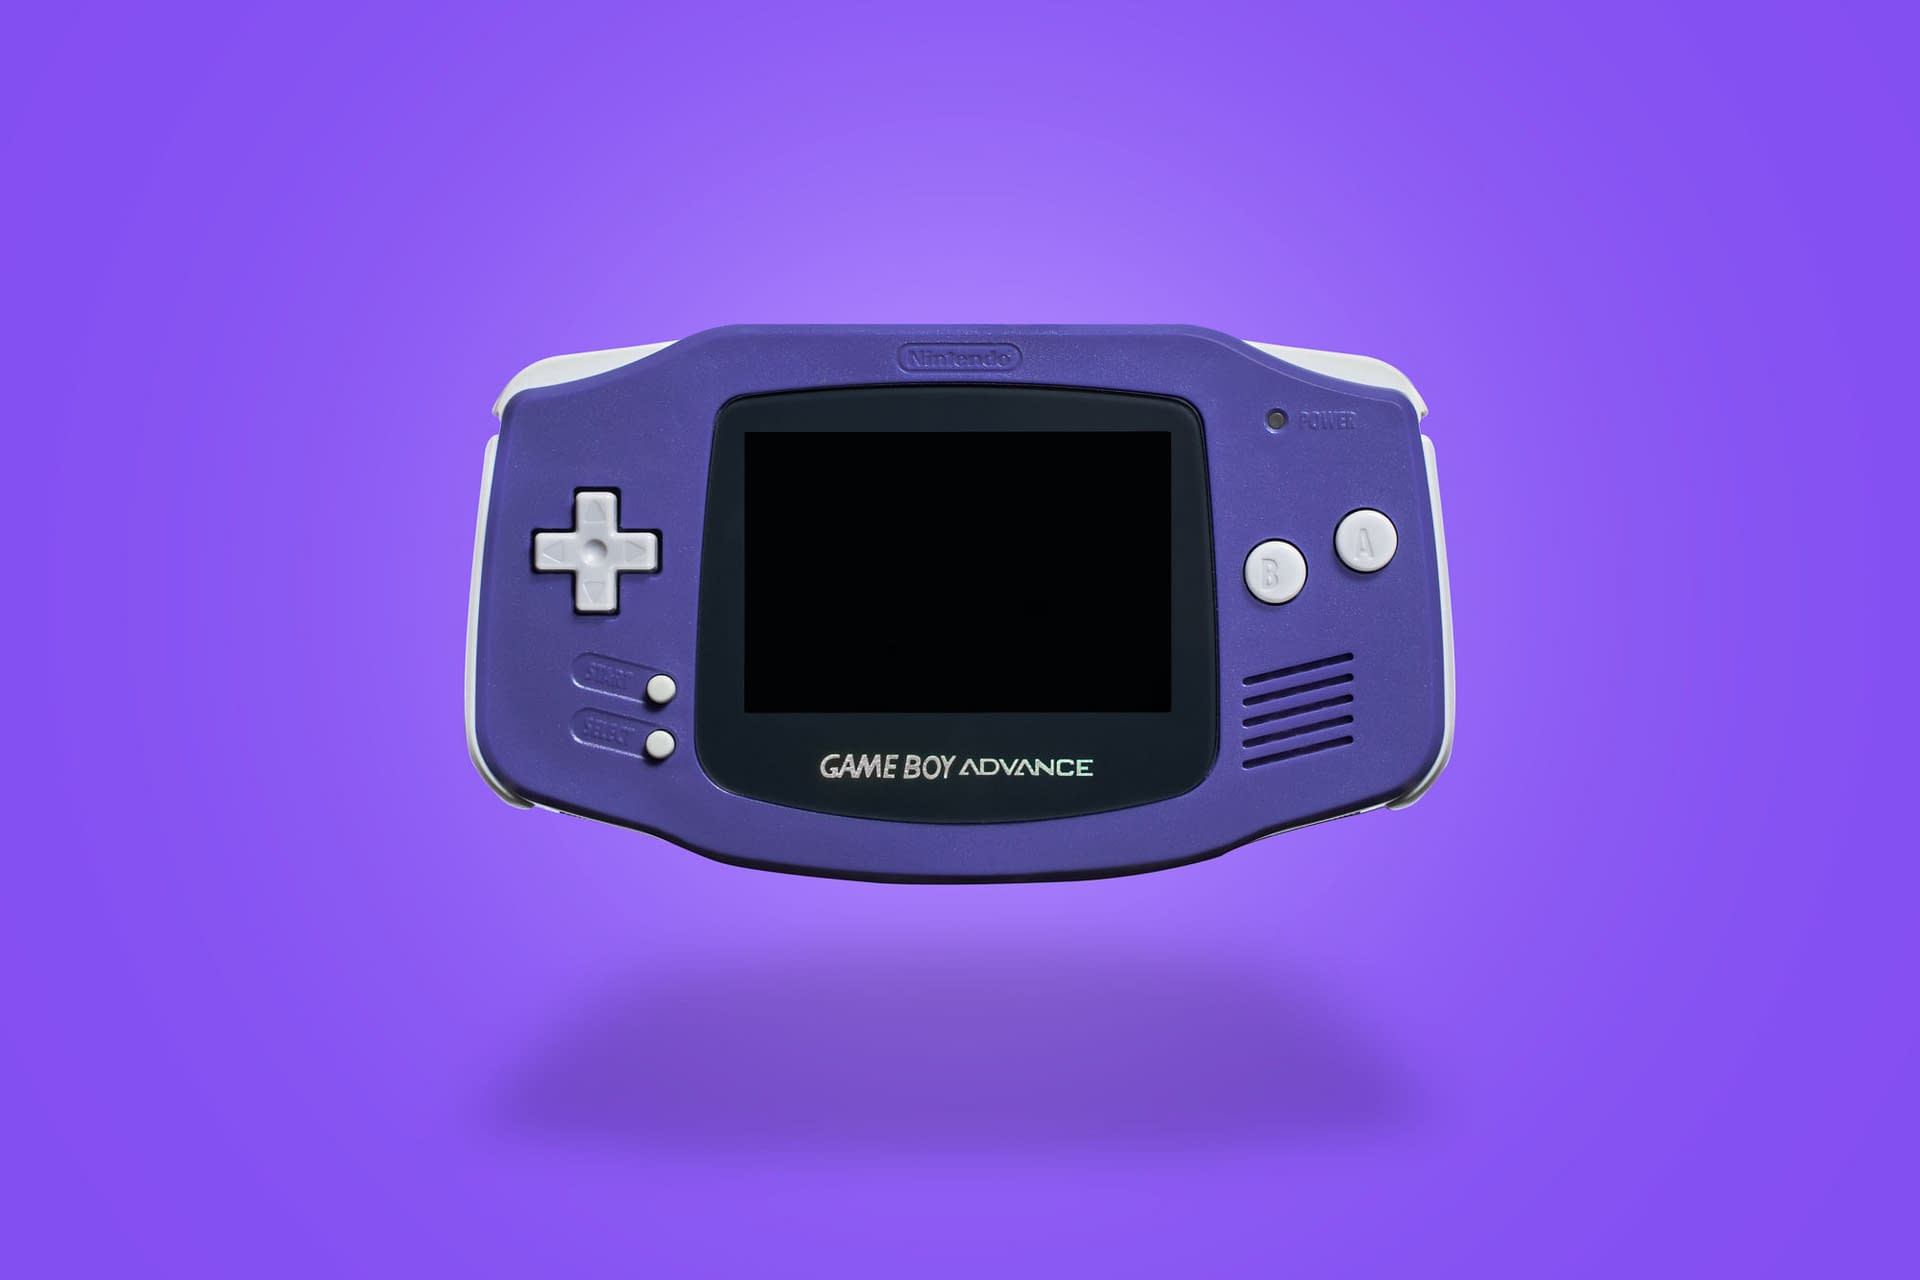 Official' Game Boy emulator for Switch apparently leaks online